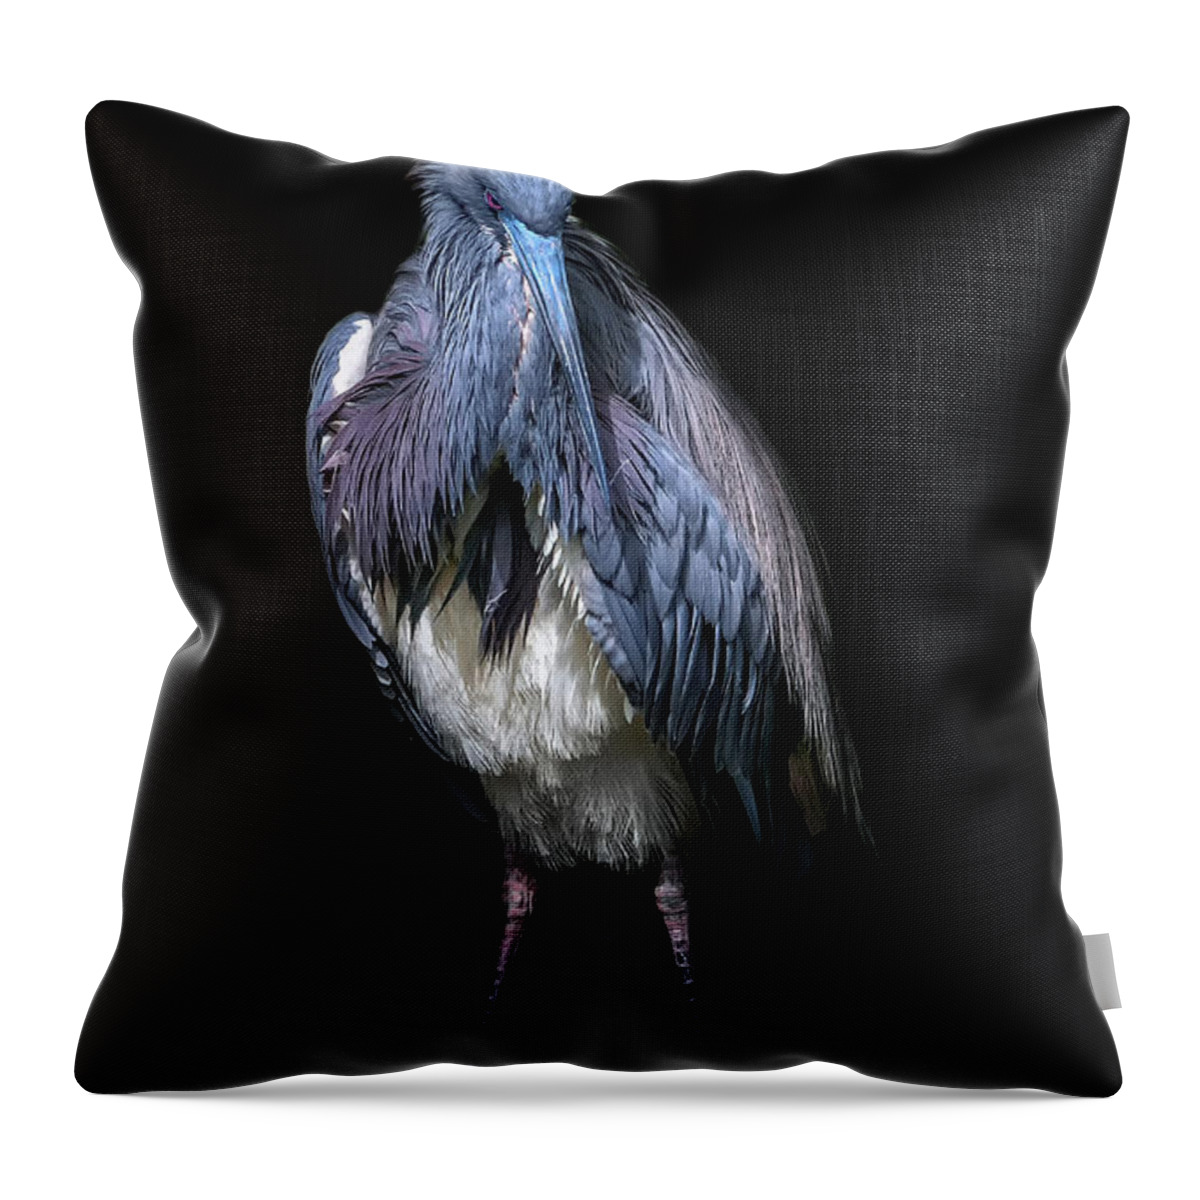 Crystal Yingling Throw Pillow featuring the photograph Strike A Pose by Ghostwinds Photography